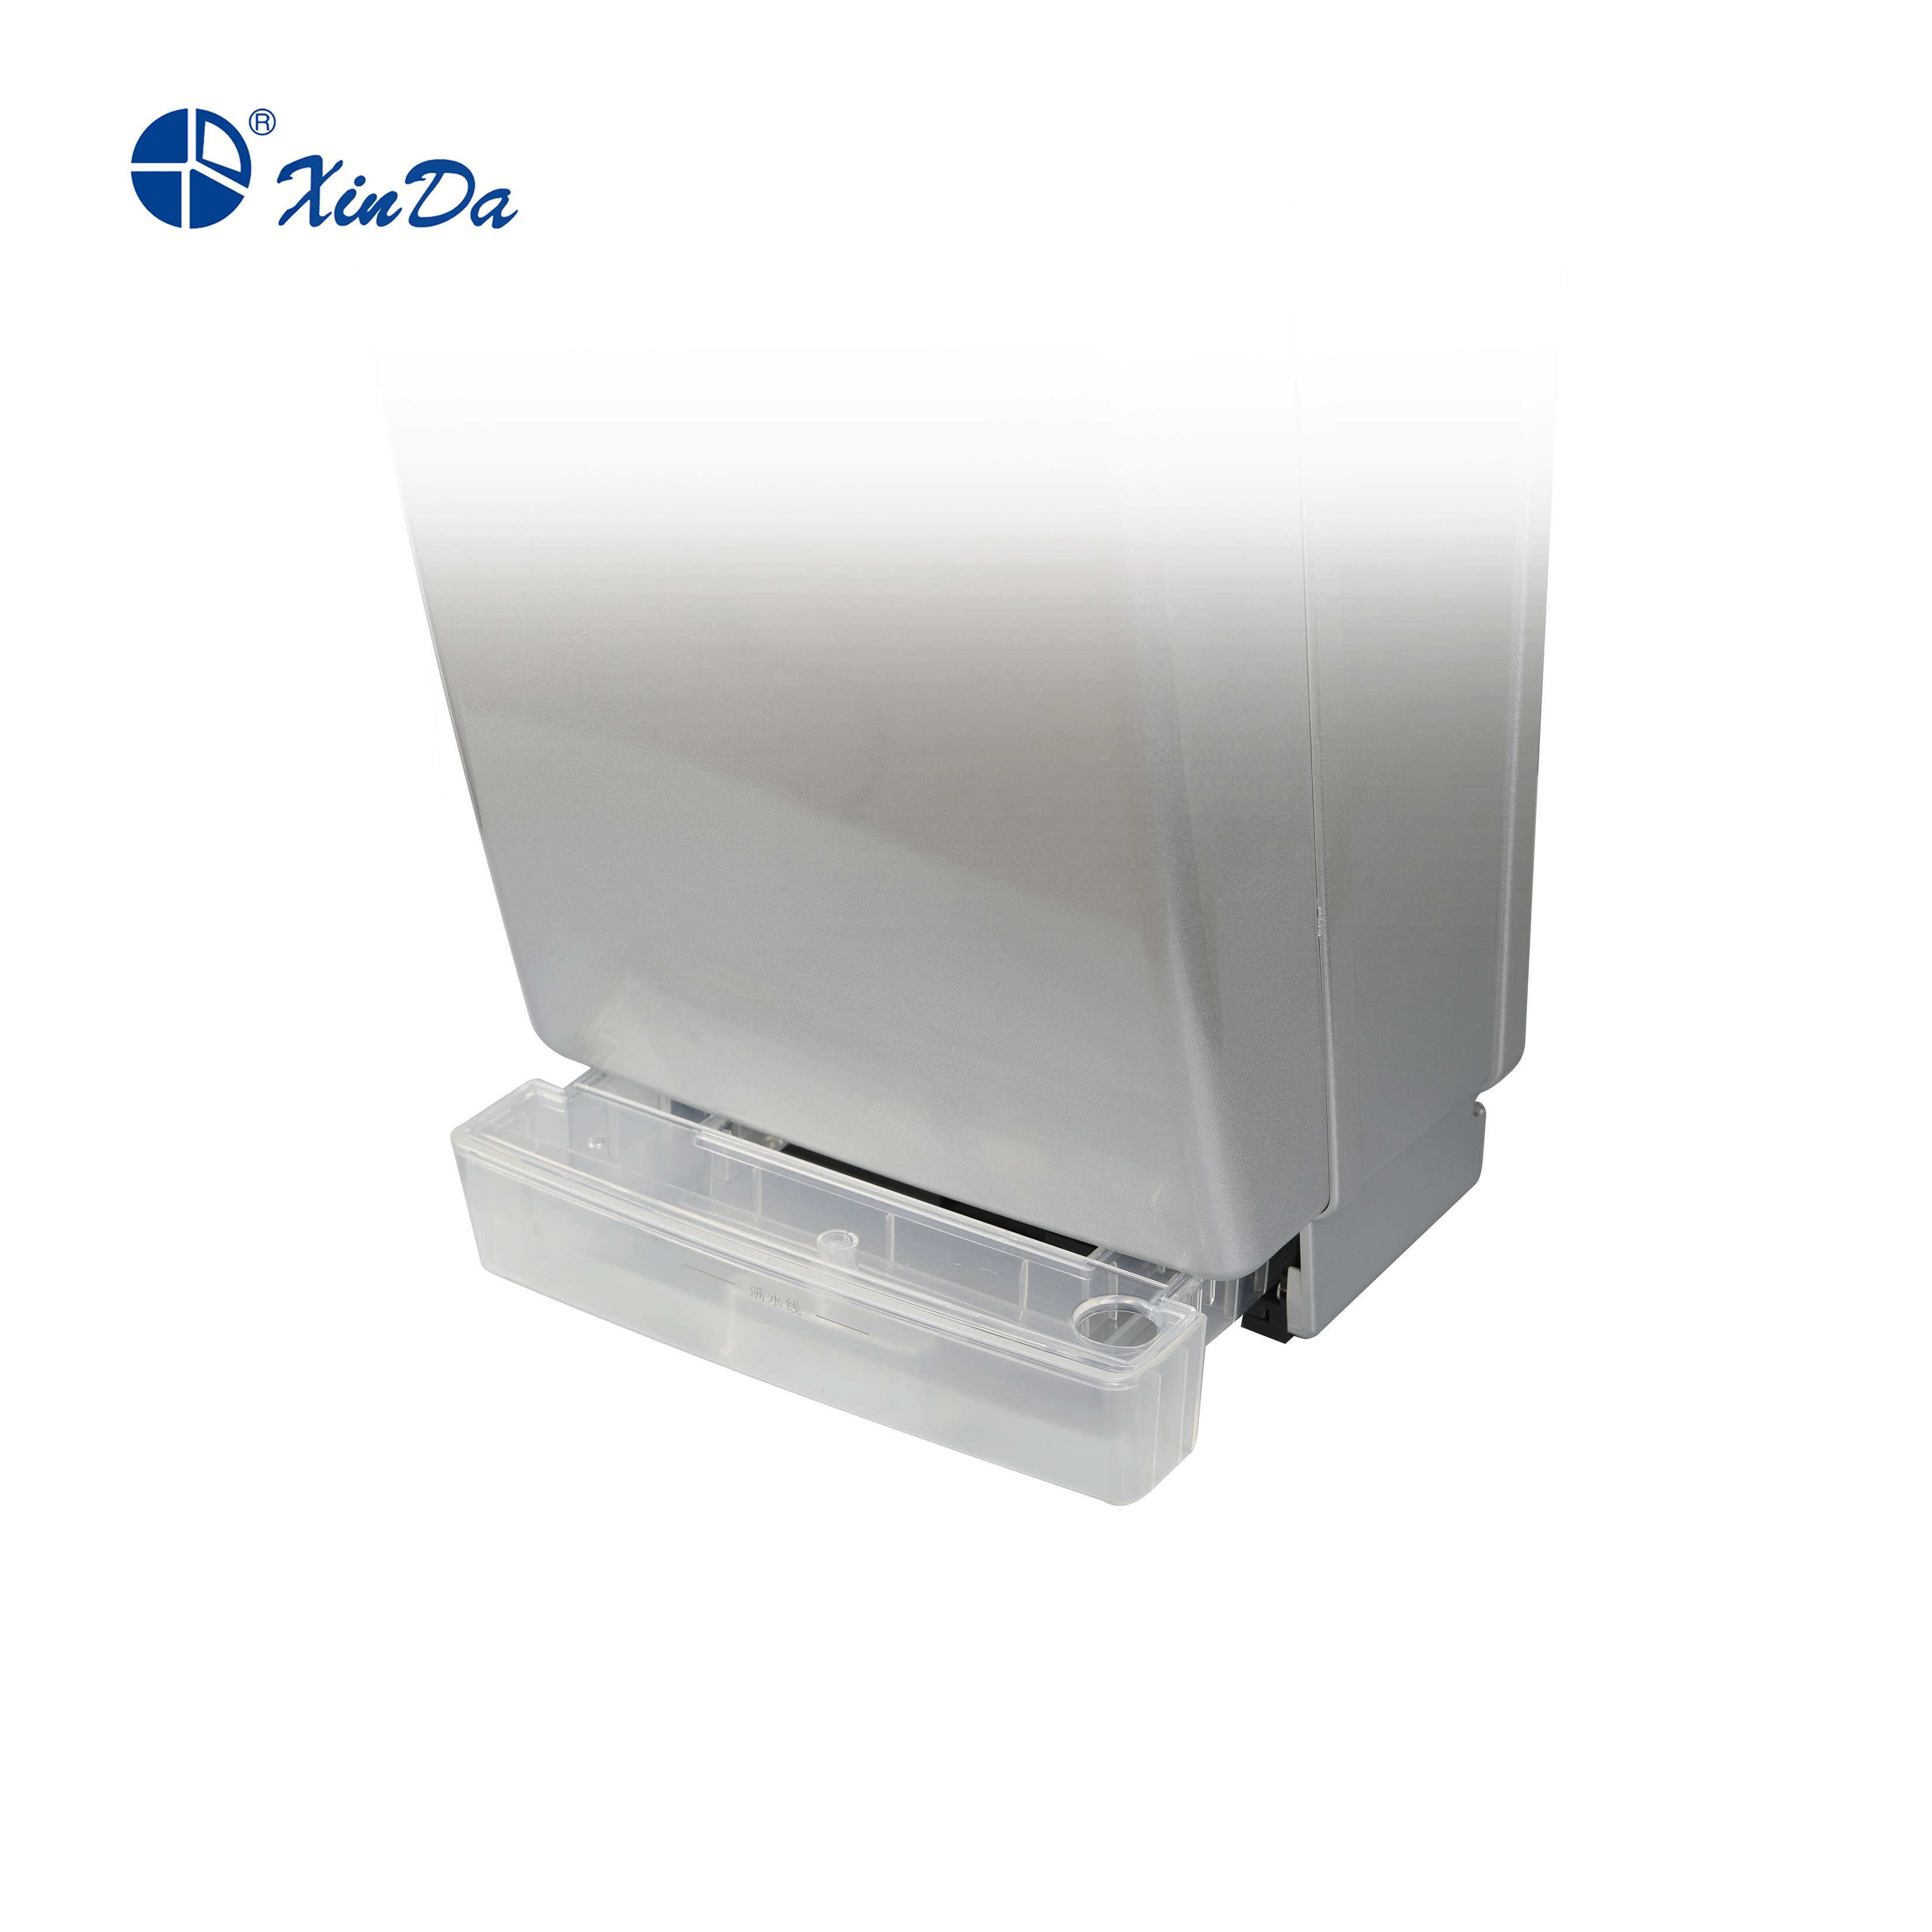 Professional Jet Hand Dryer Automatic Infrared Sensor with Air Filter Fiber